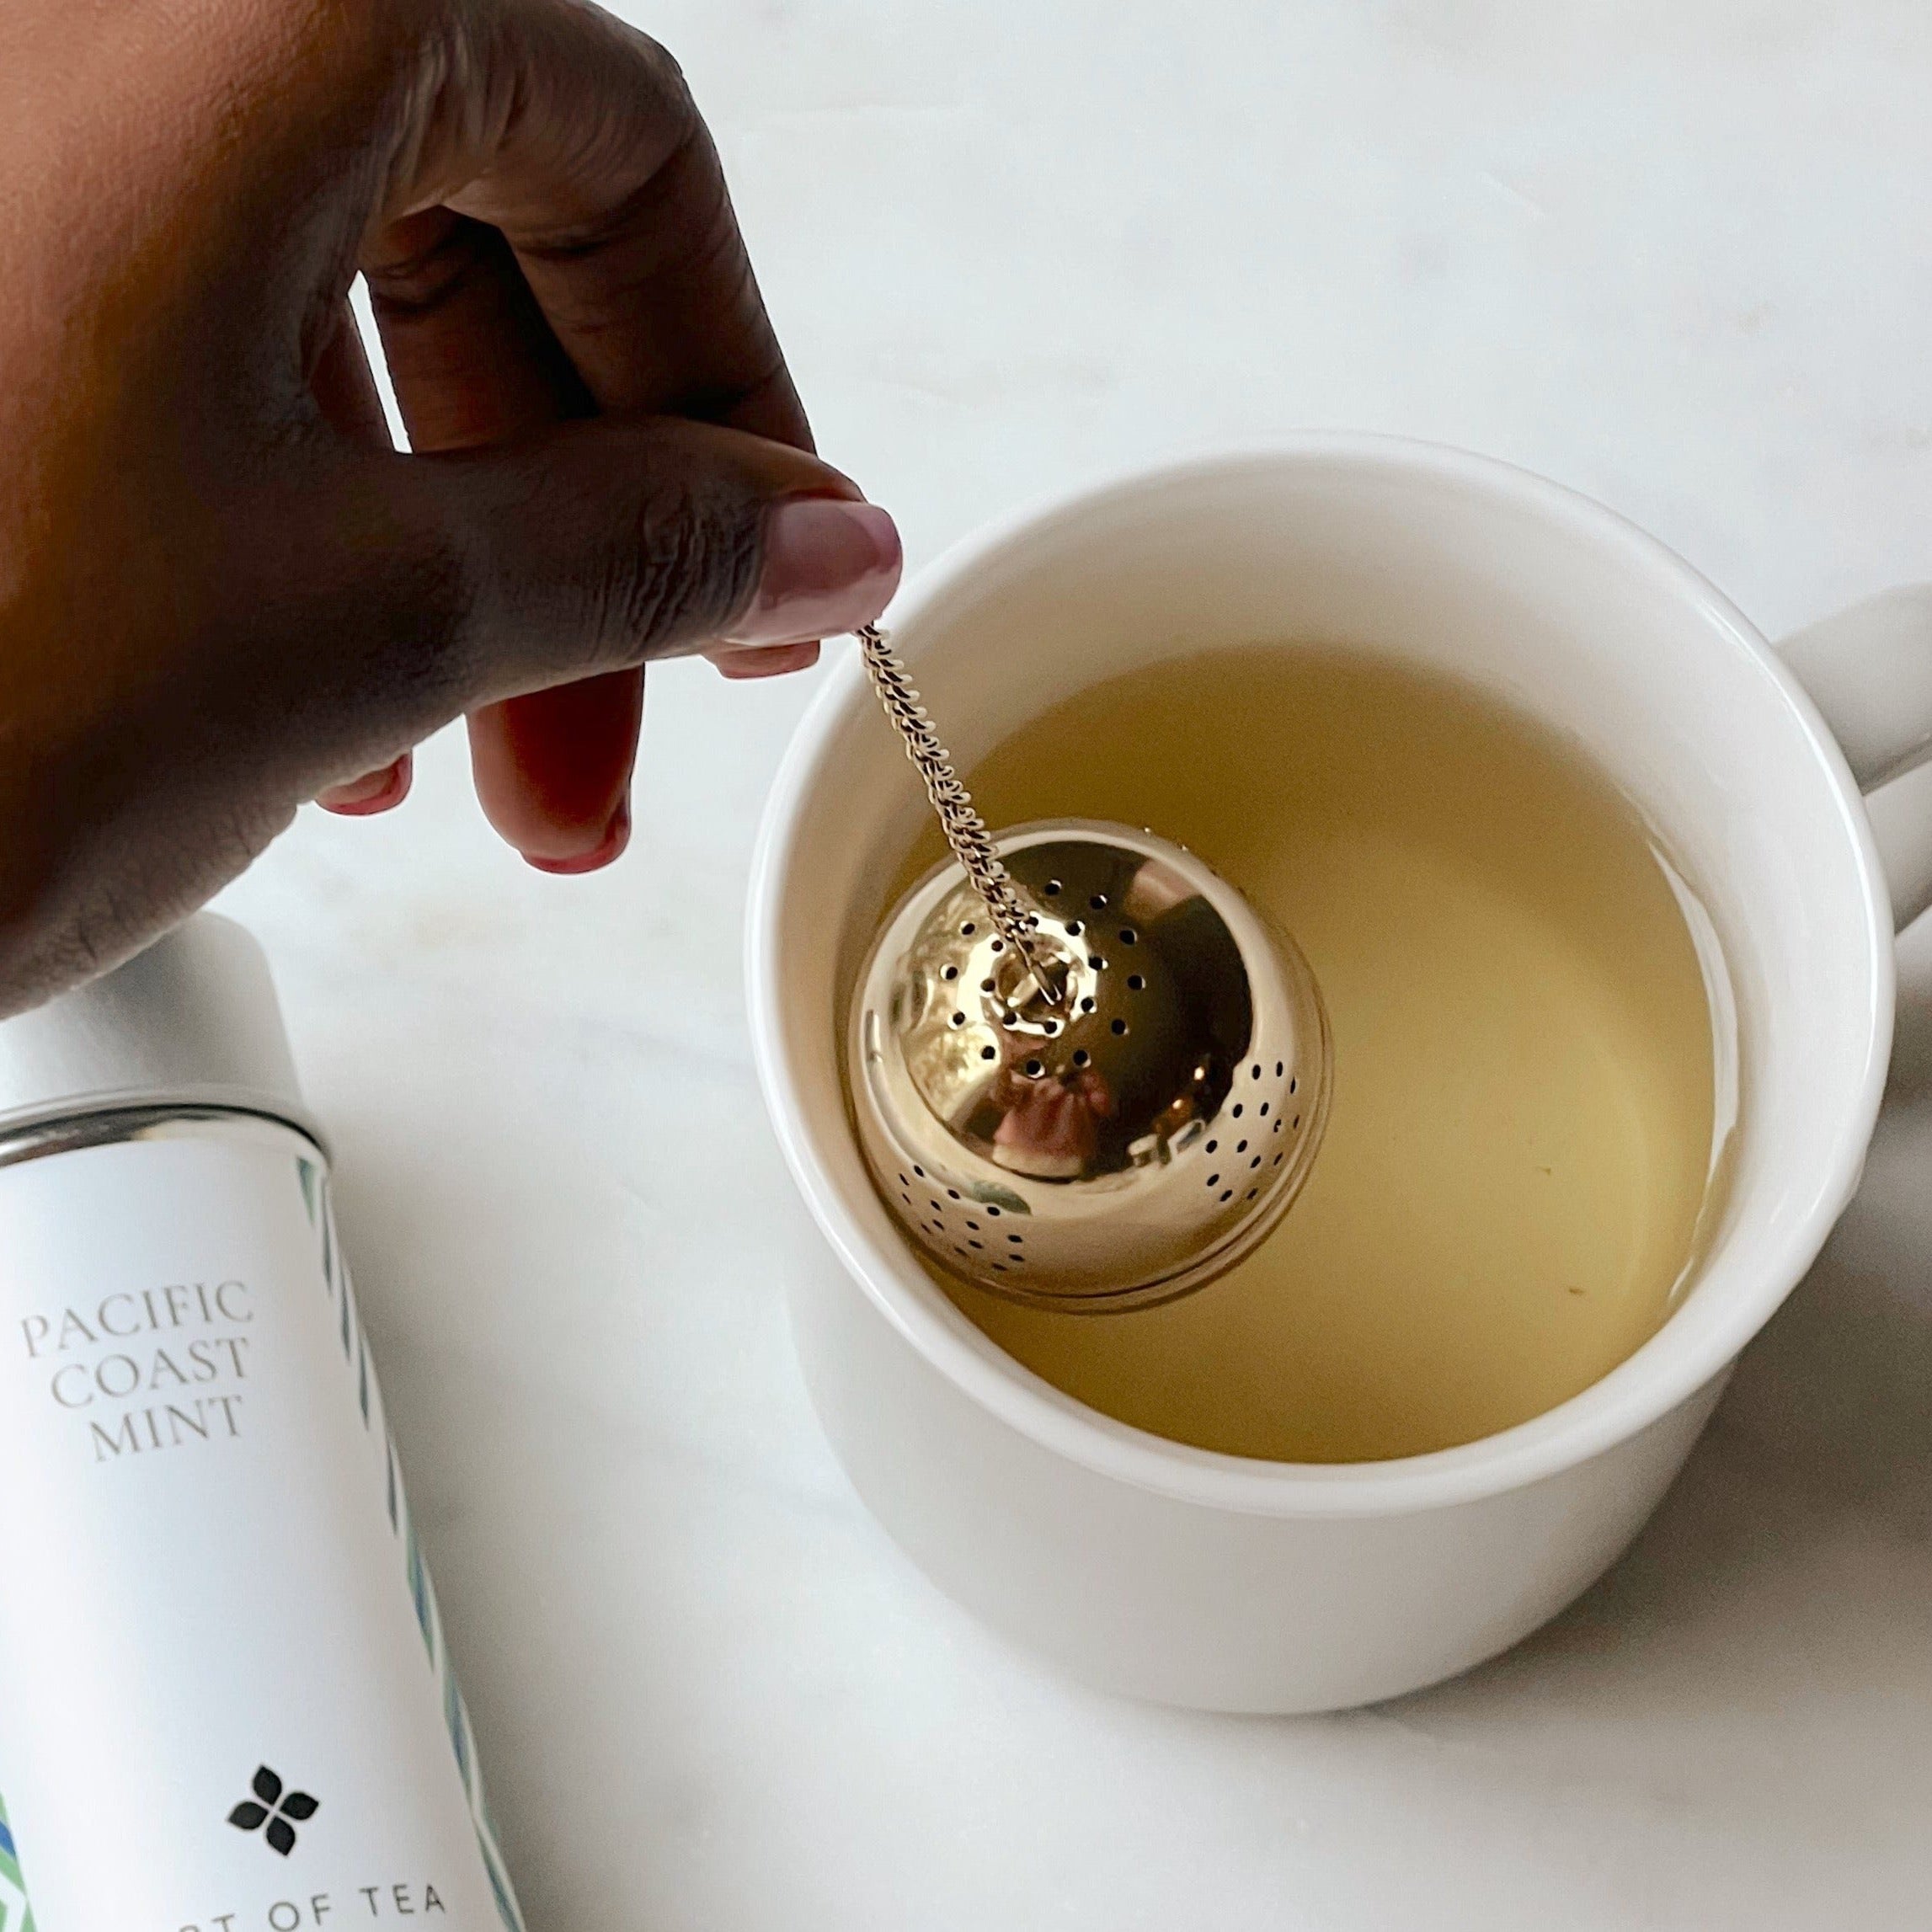 A woman&#39;s hand dipping a gold acorn tea infuser into a light grey ceramic mug holding hot water. Next to the mug is Art of Tea Pacific Coast Mint tea in a tin.